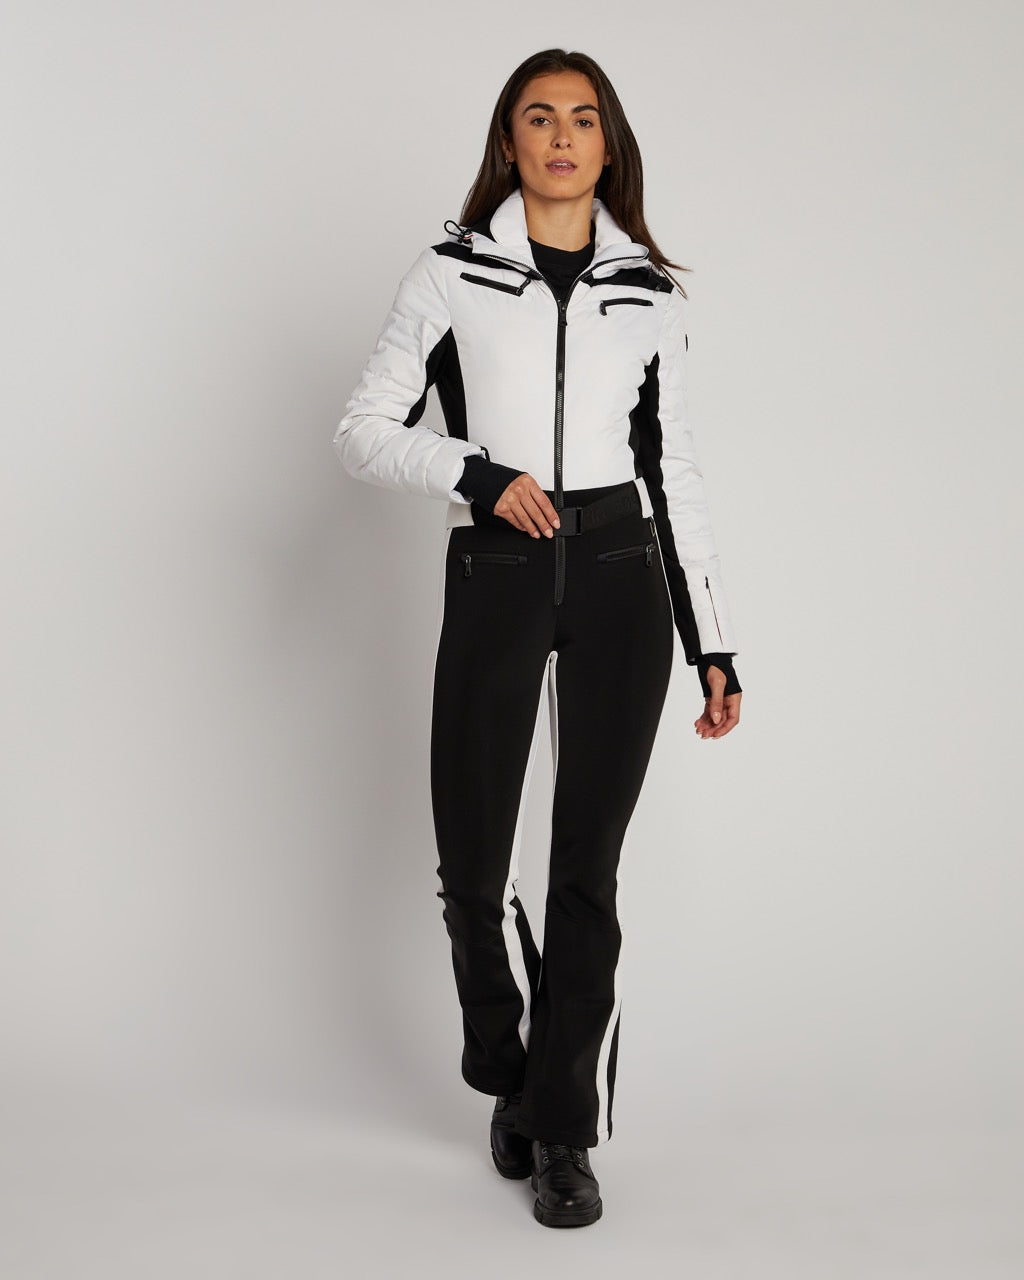 Erin Snow Women's Luna Ski Suit in Eco Sporty With Soft-Shell - Black/